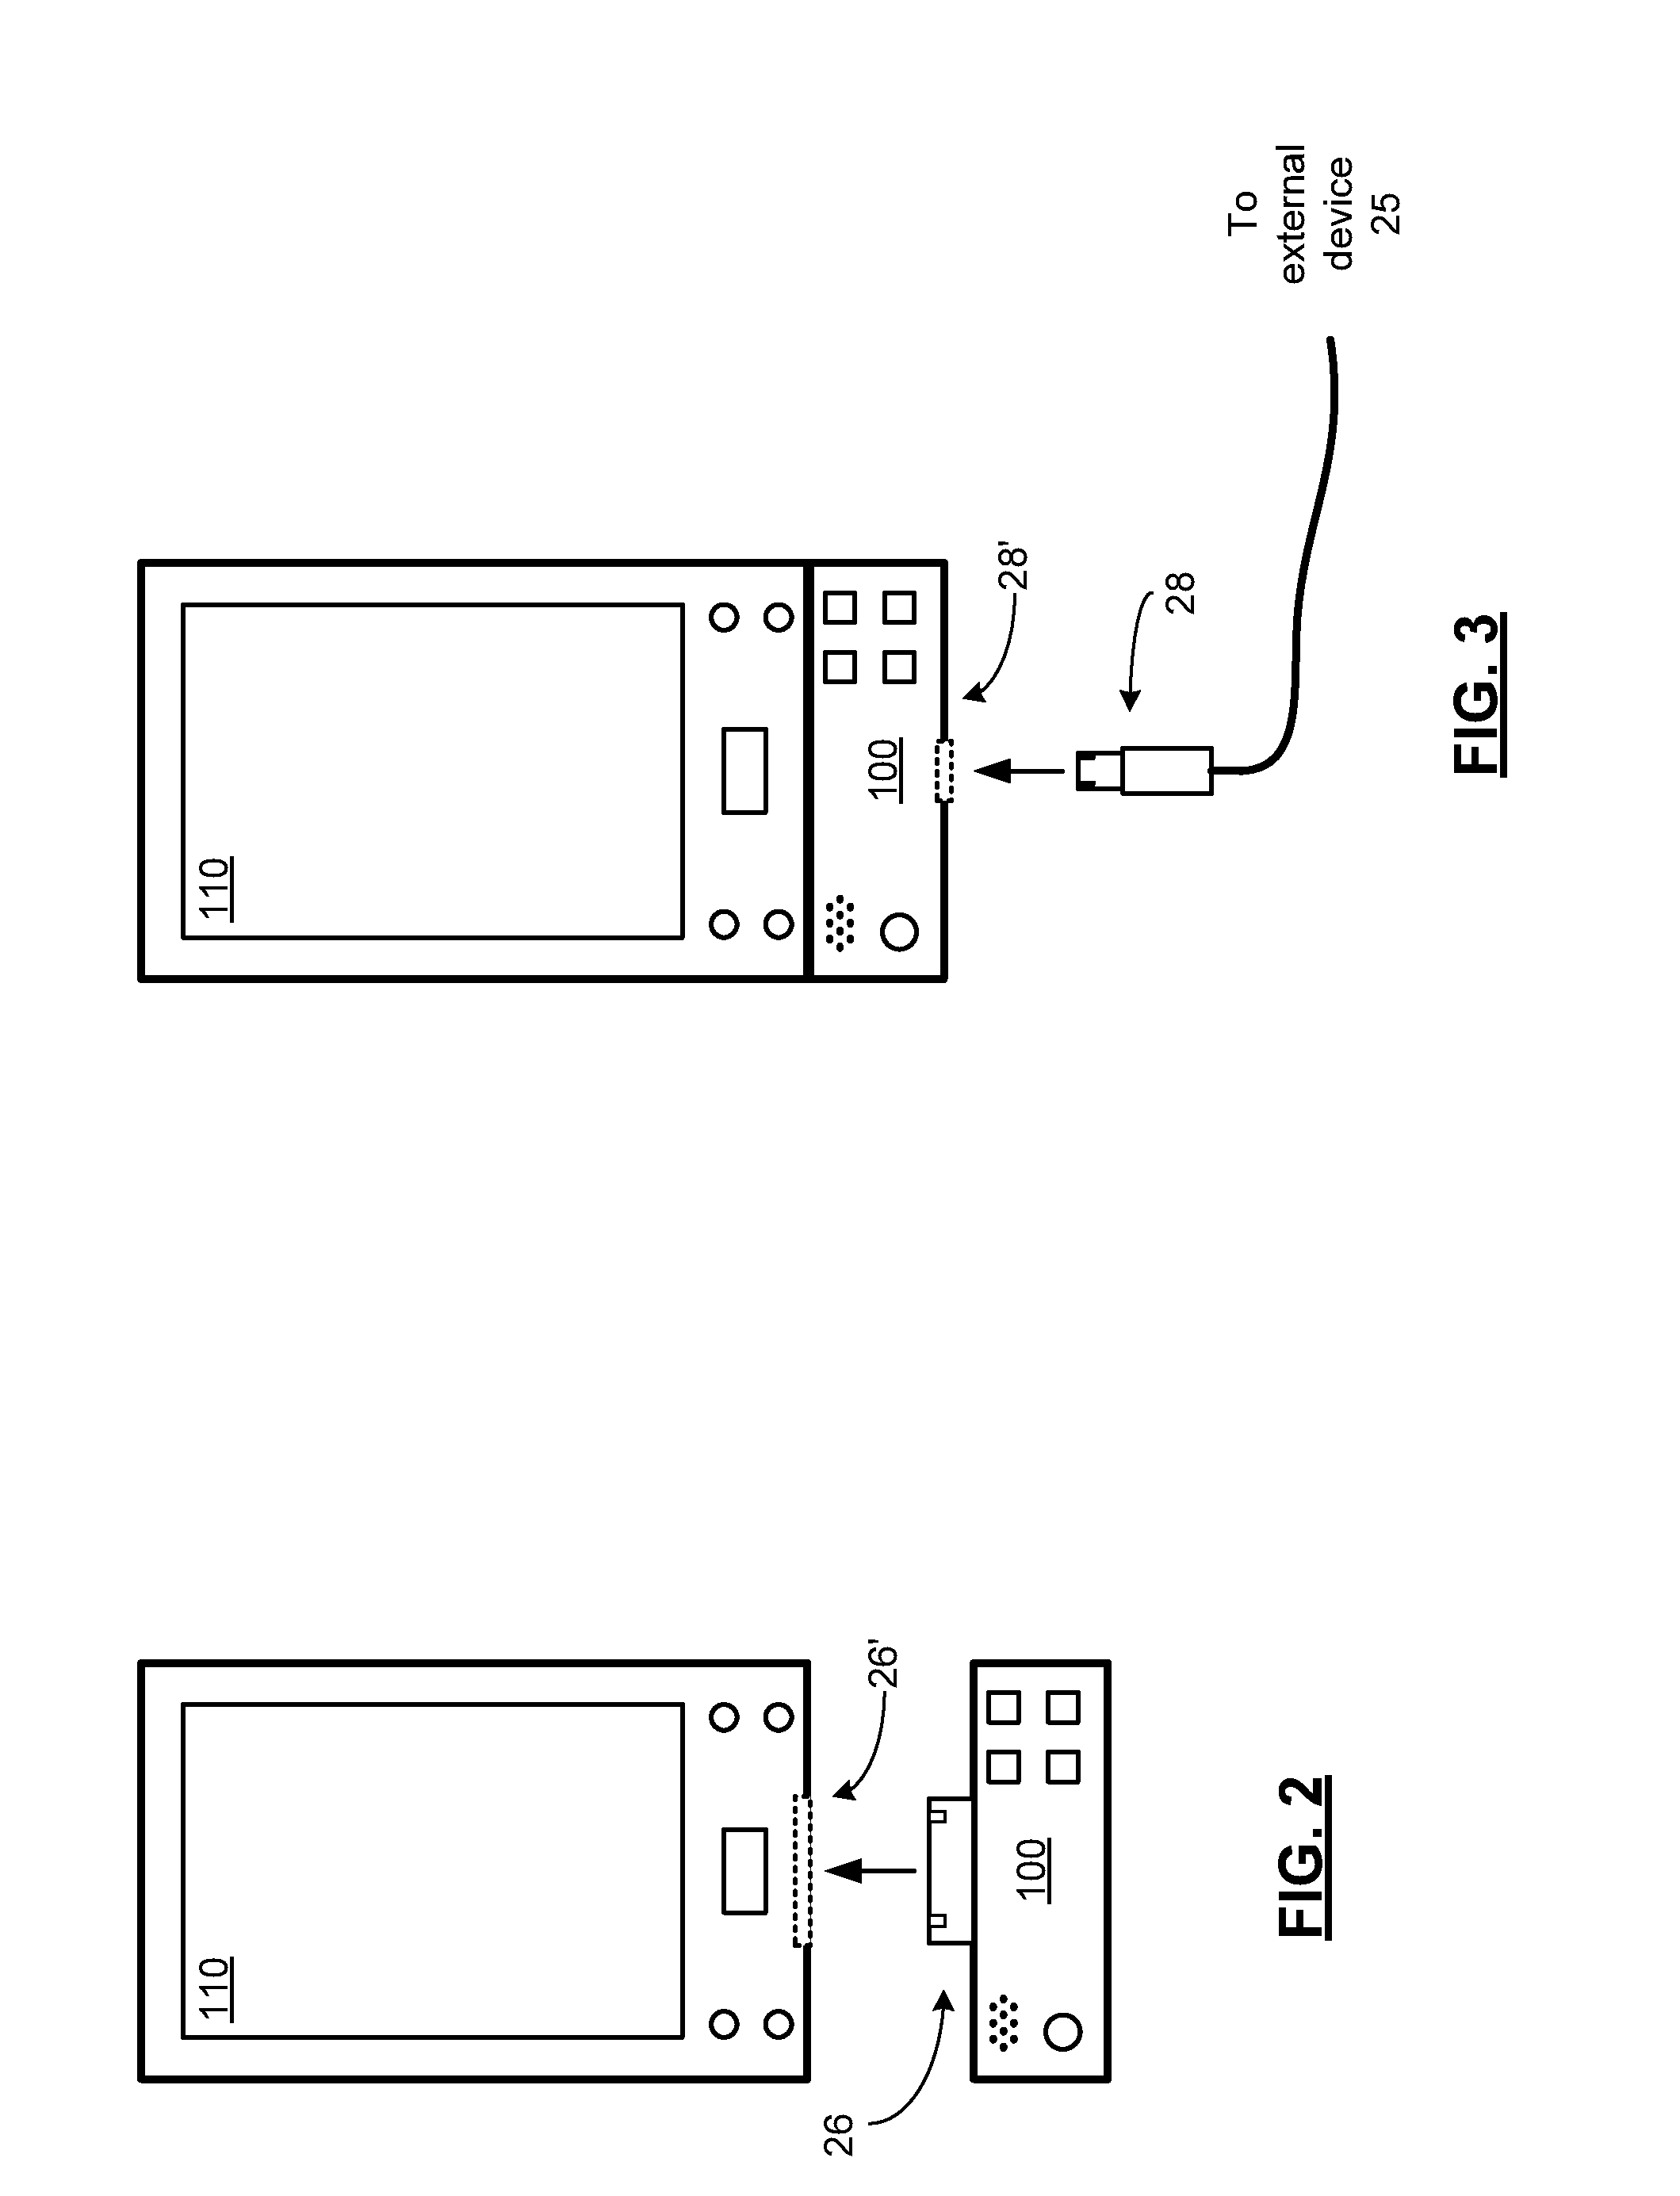 Bridge device for use in a system for monitoring protective headgear